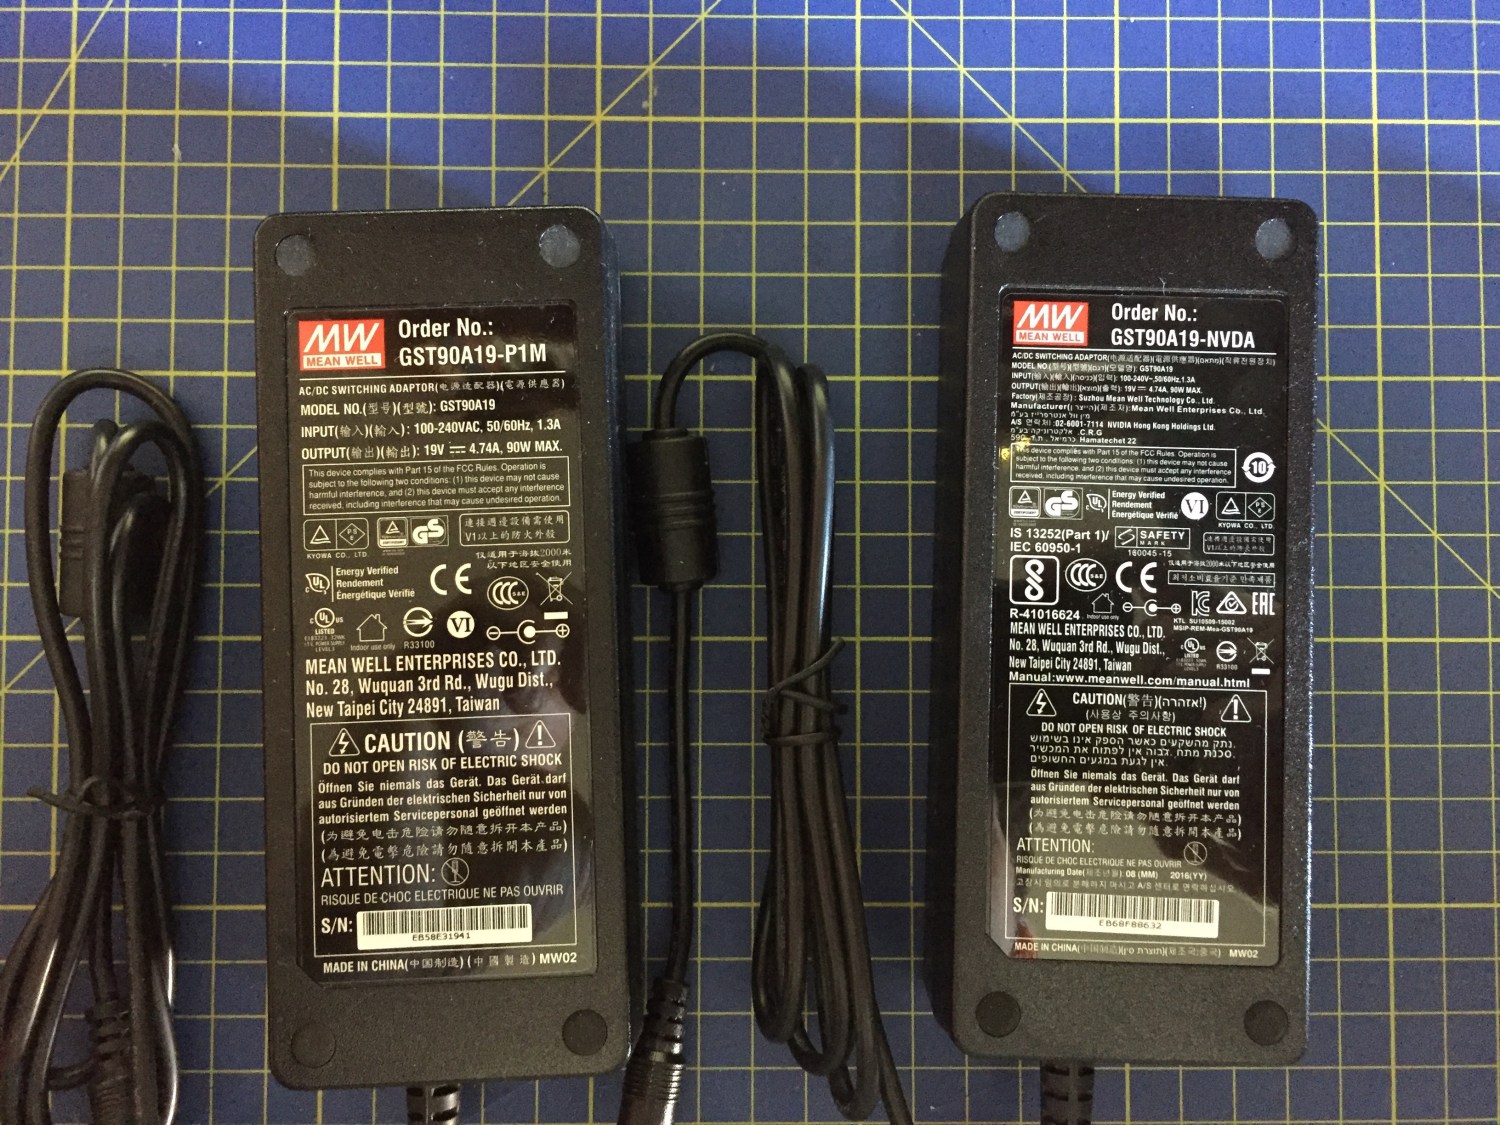 Comparison between power supply of Jetson TX1 and Jetson TX2